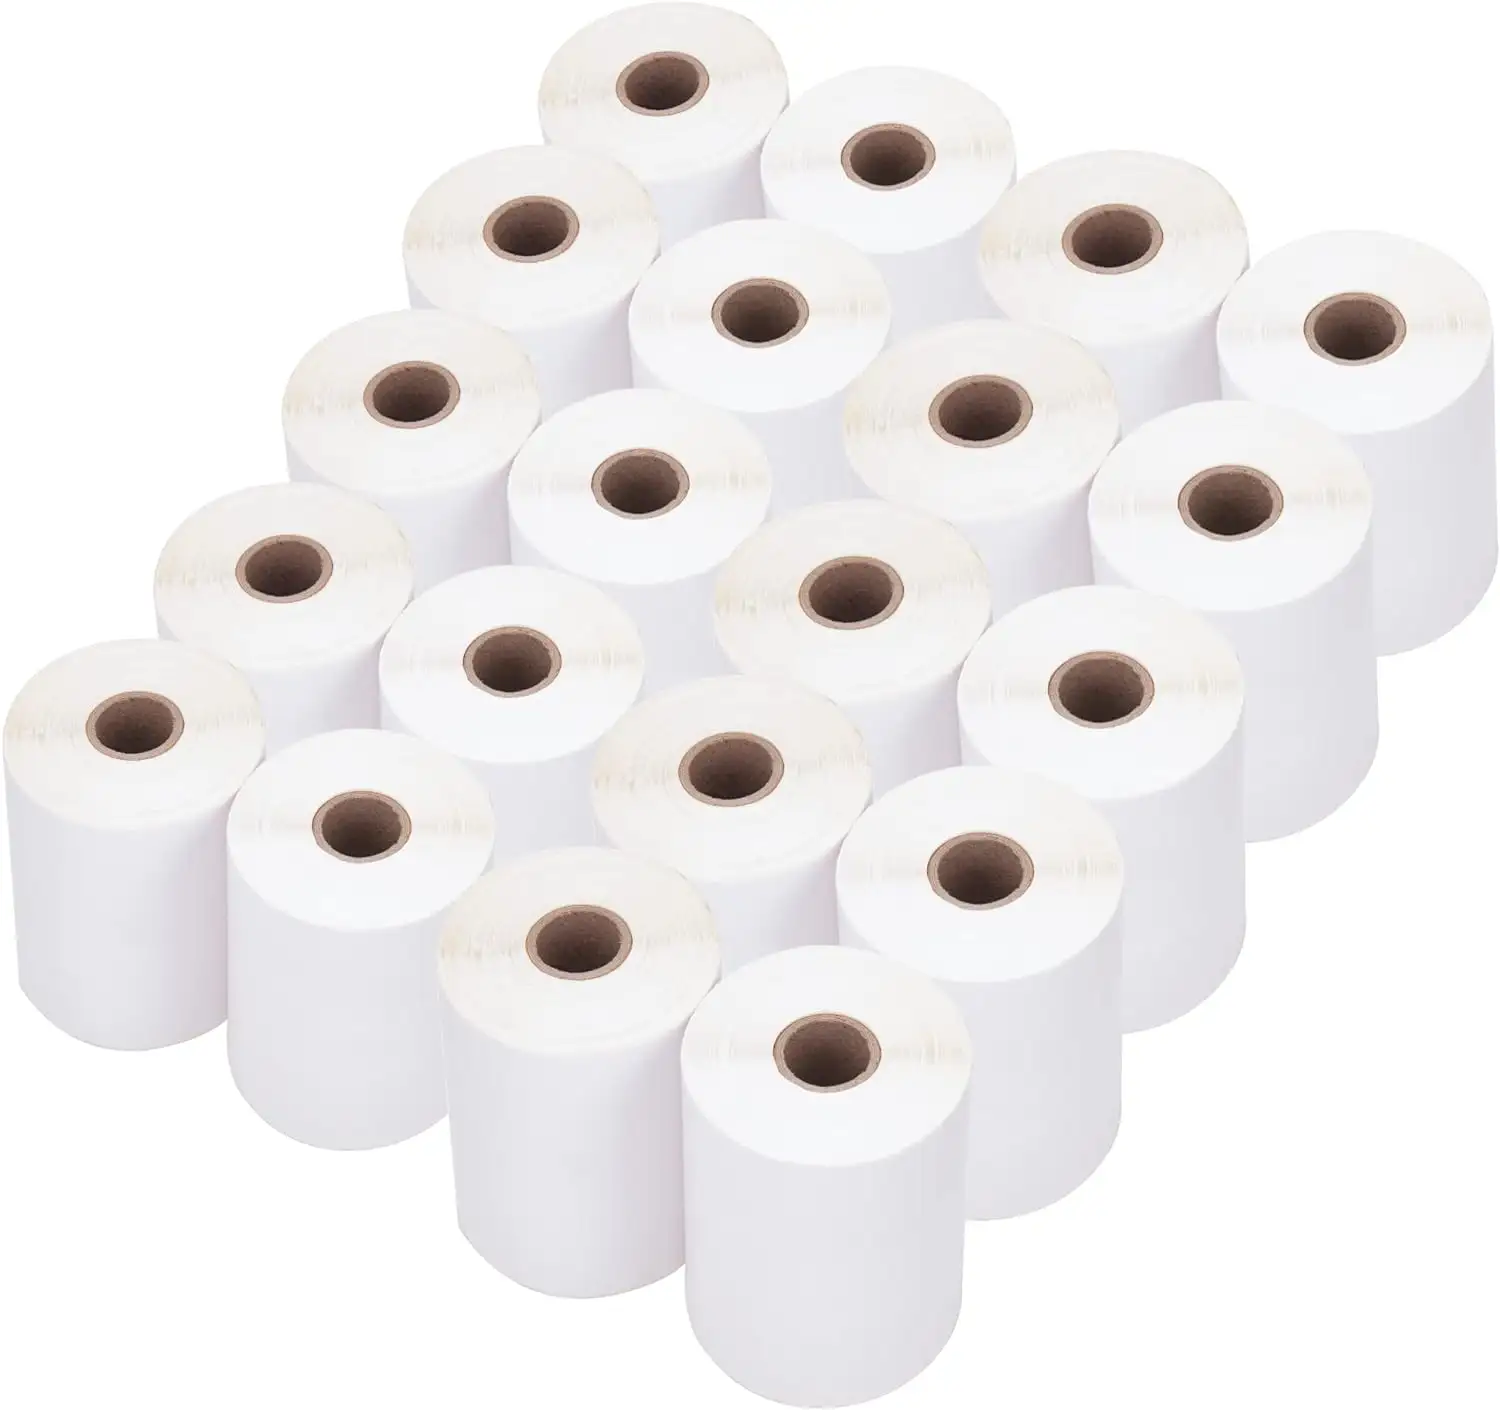 20ROLLS 250PCS PER ROLL Waterproof Recyclable Paper Thermal Labels Self-Adhesive Roll for Shipping   Packaging